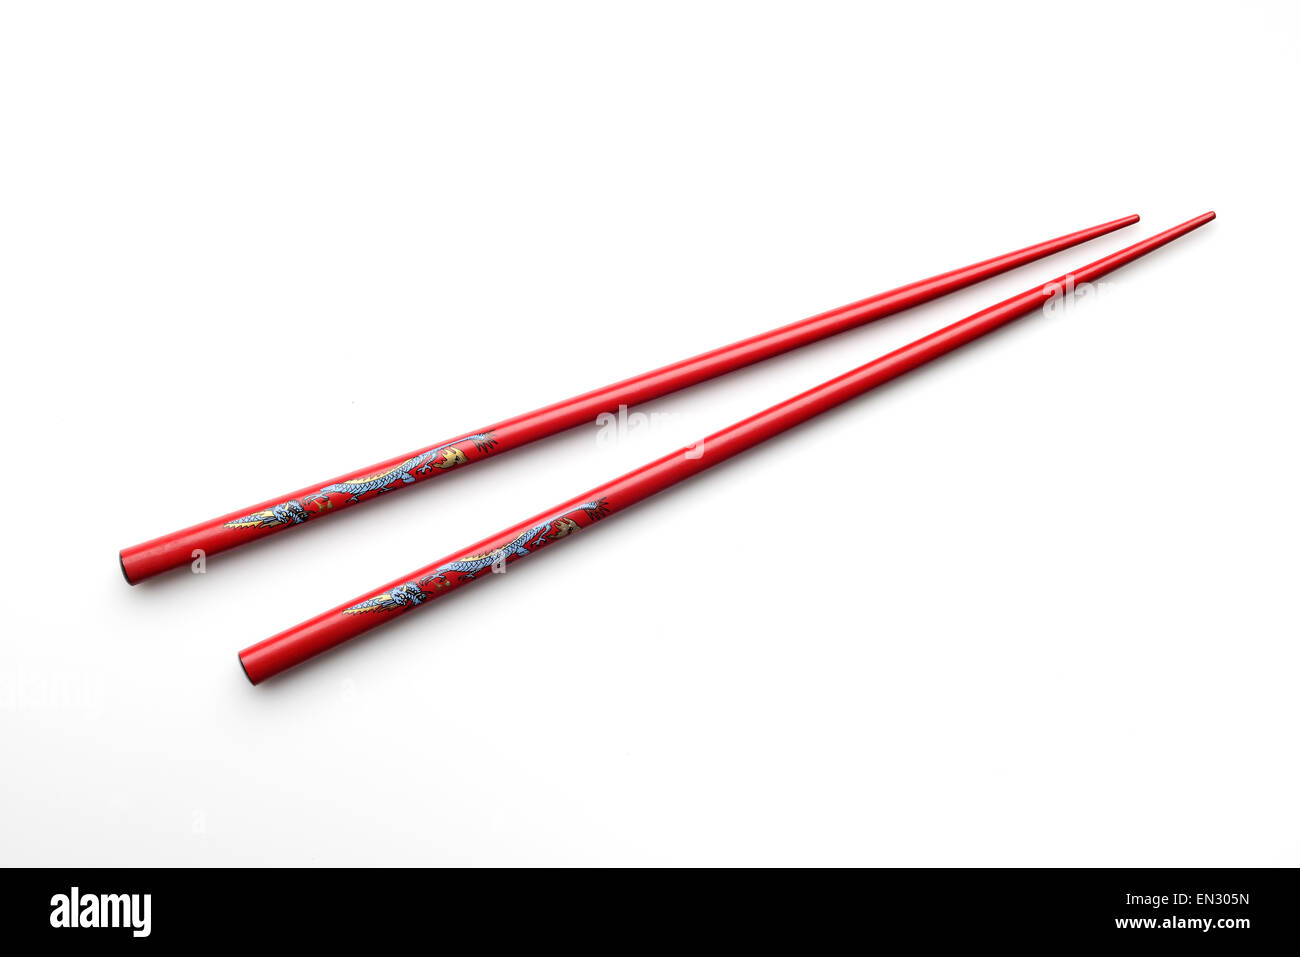 High resolution image of red wooden chopsticks with blue and yellow dragon. Stock Photo